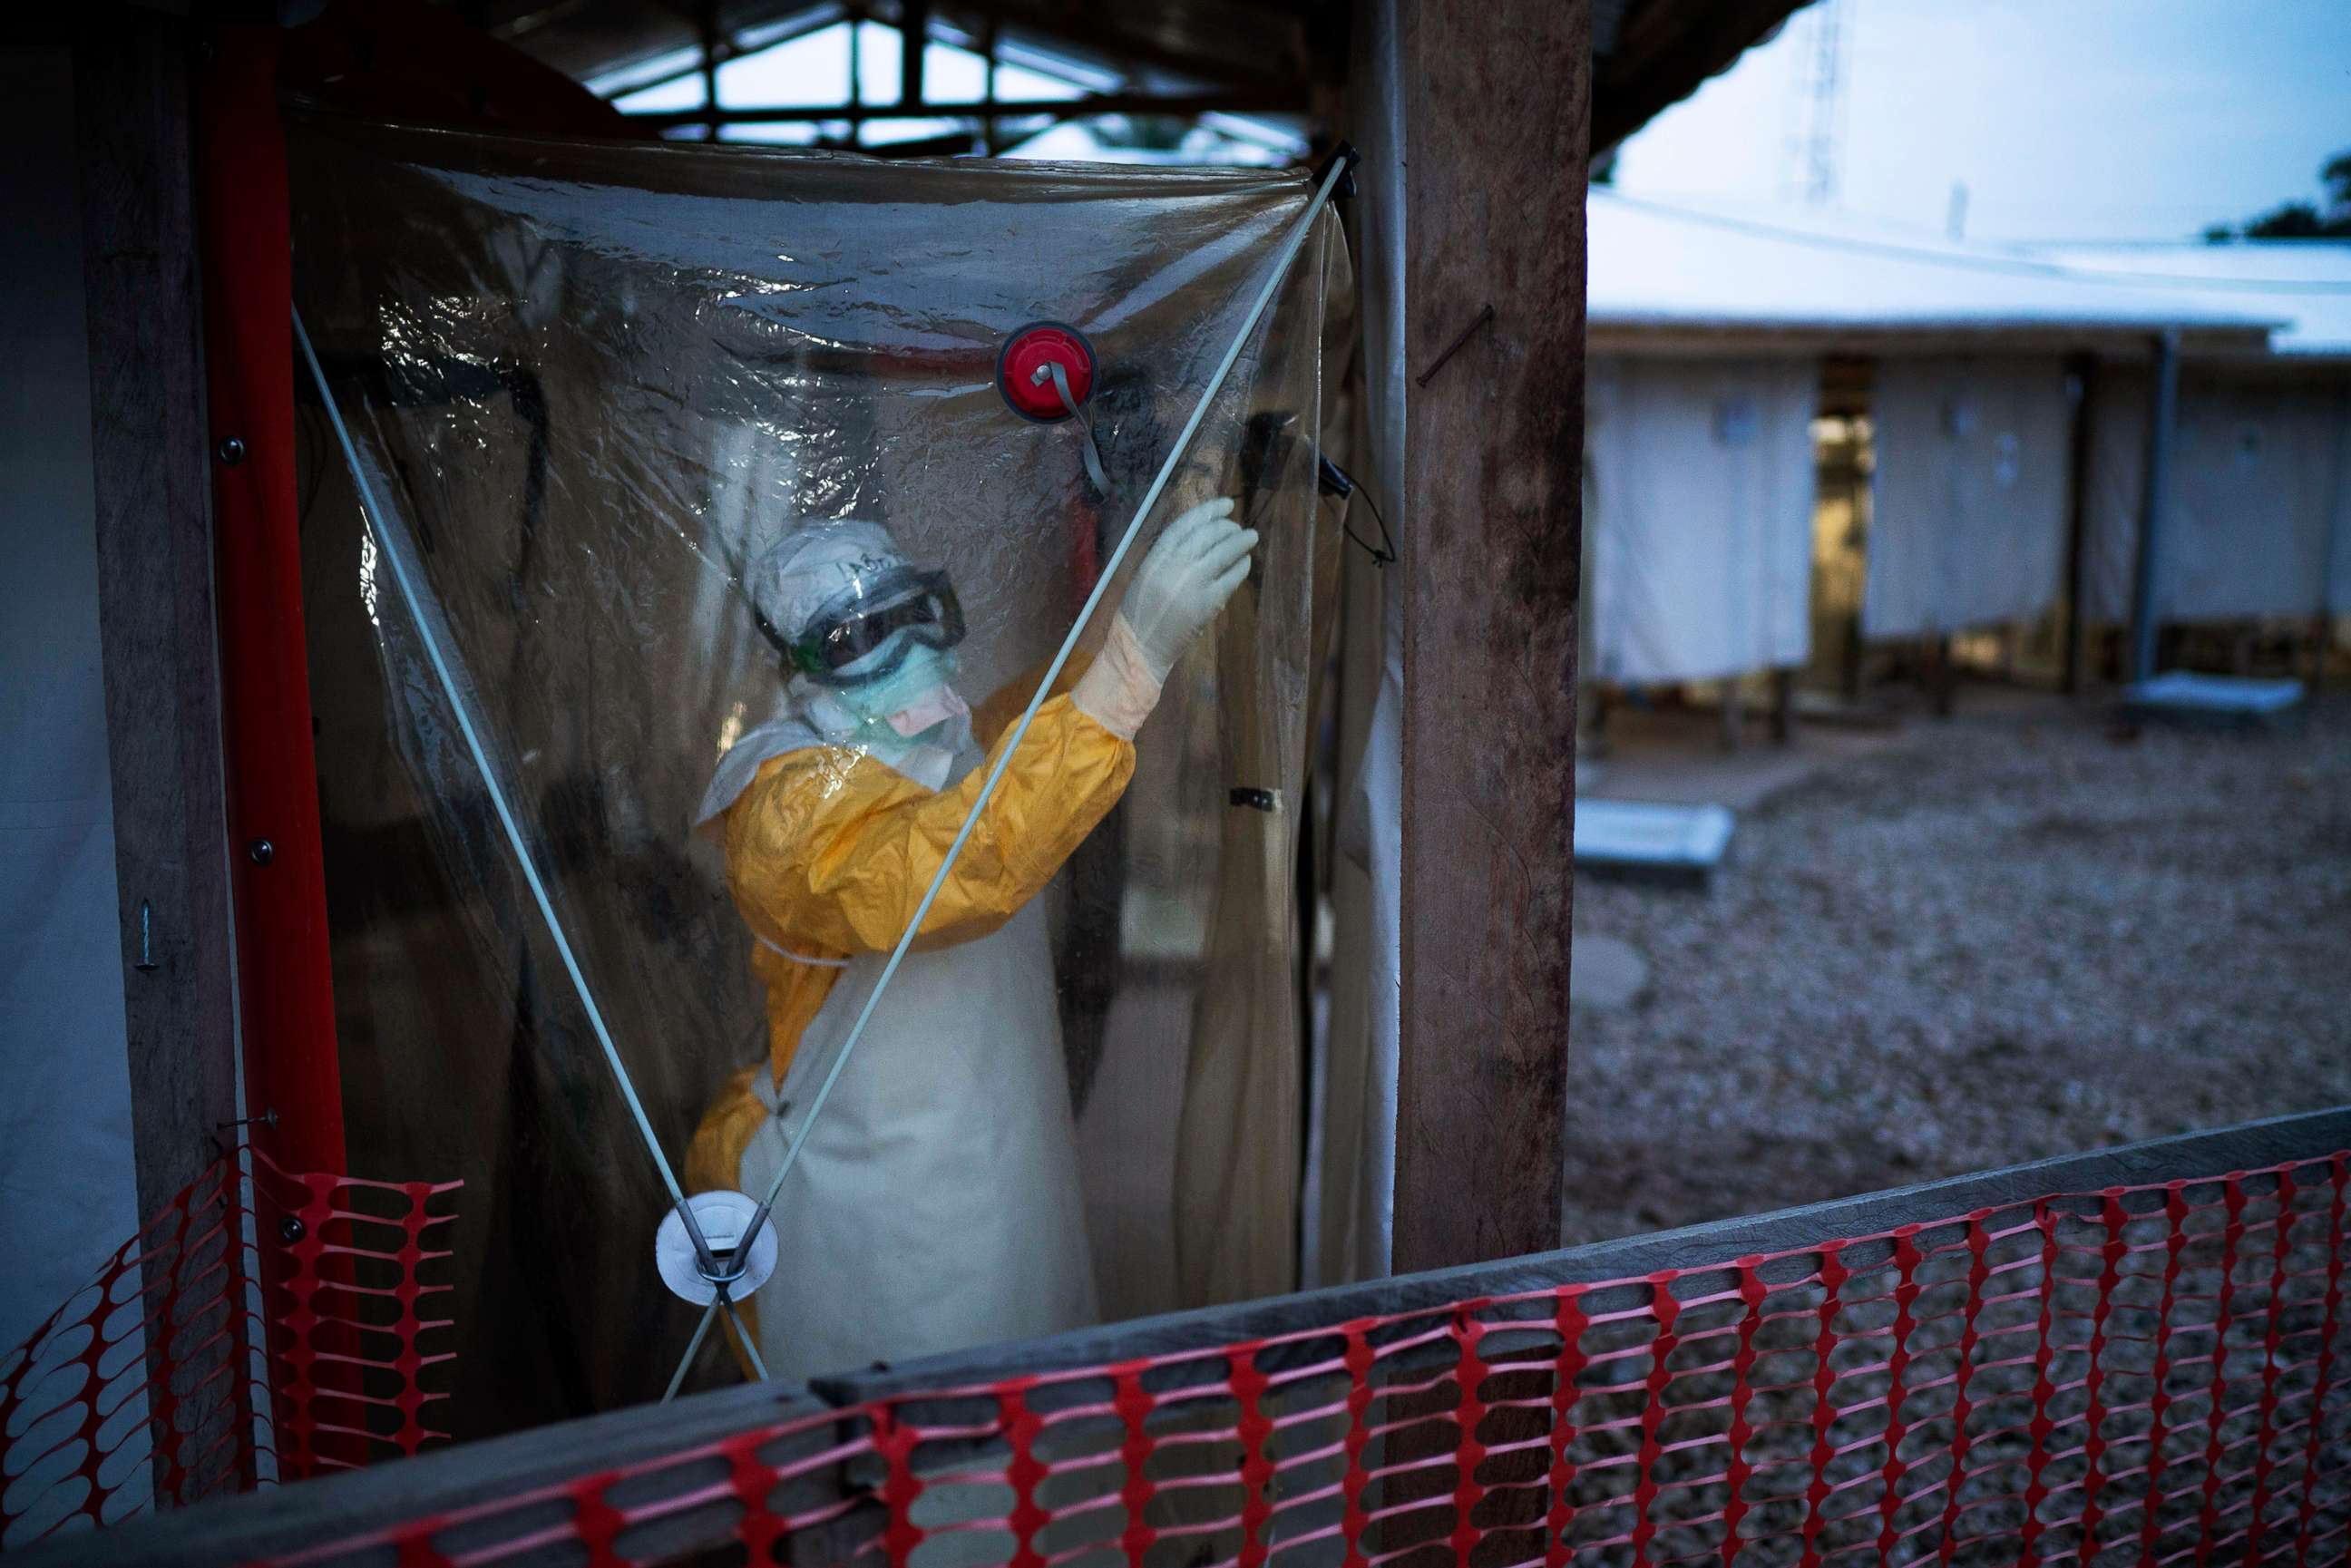 PHOTO: A health worker wearing a protective suit enters an isolation pod to treat a patient at a treatment center in Beni, Democratic Republic of Congo, July 13, 2019.